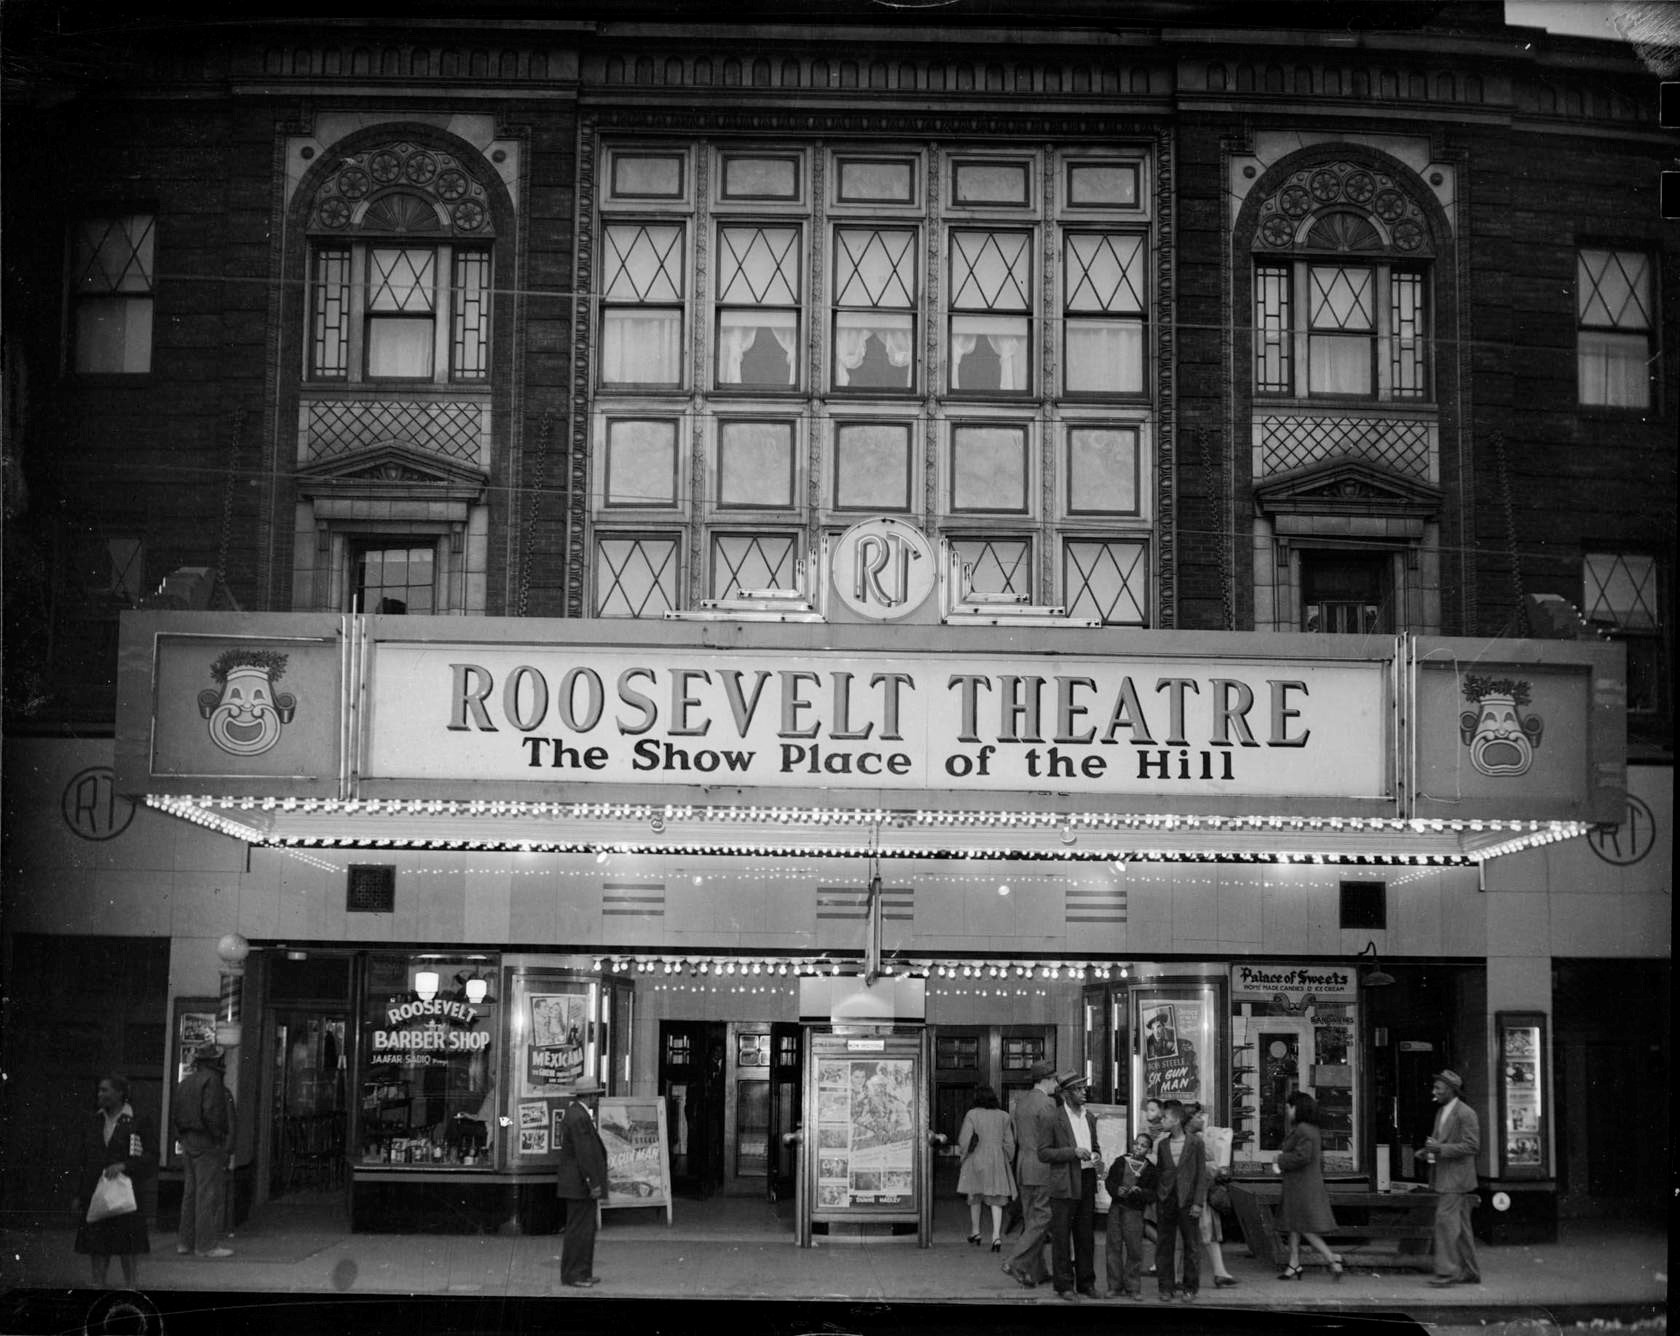 The marquee of the Roosevelt Theatre in Pittsburgh’s Hill District, as photographed by Teenie Harris. [1]